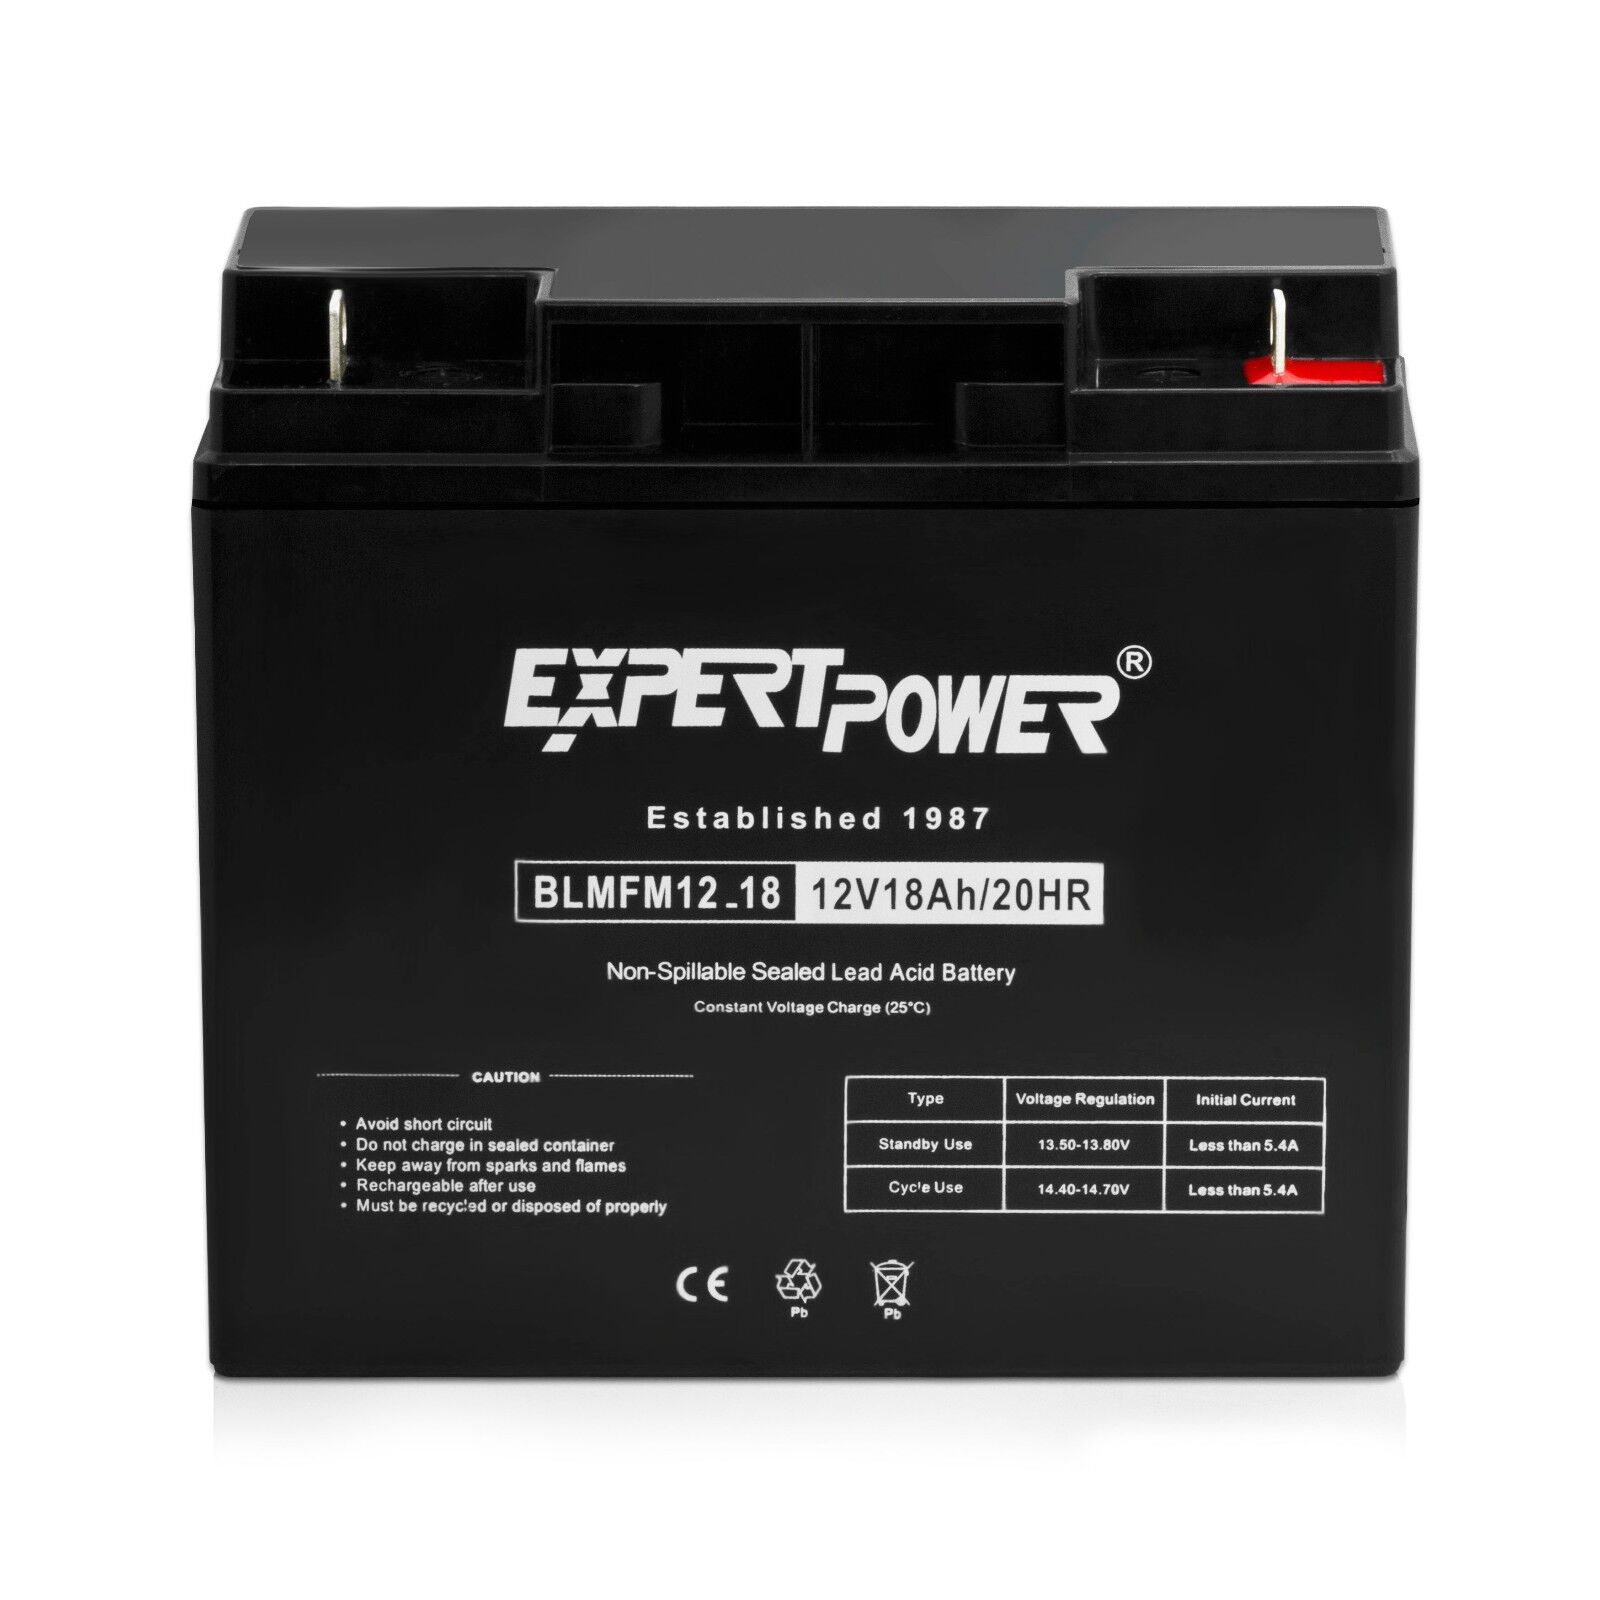 2 PACK Expert Power APC RBC7 Cartridge Battery Replacement for UPS Backup System ExpertPower EXP12180 - фотография #6